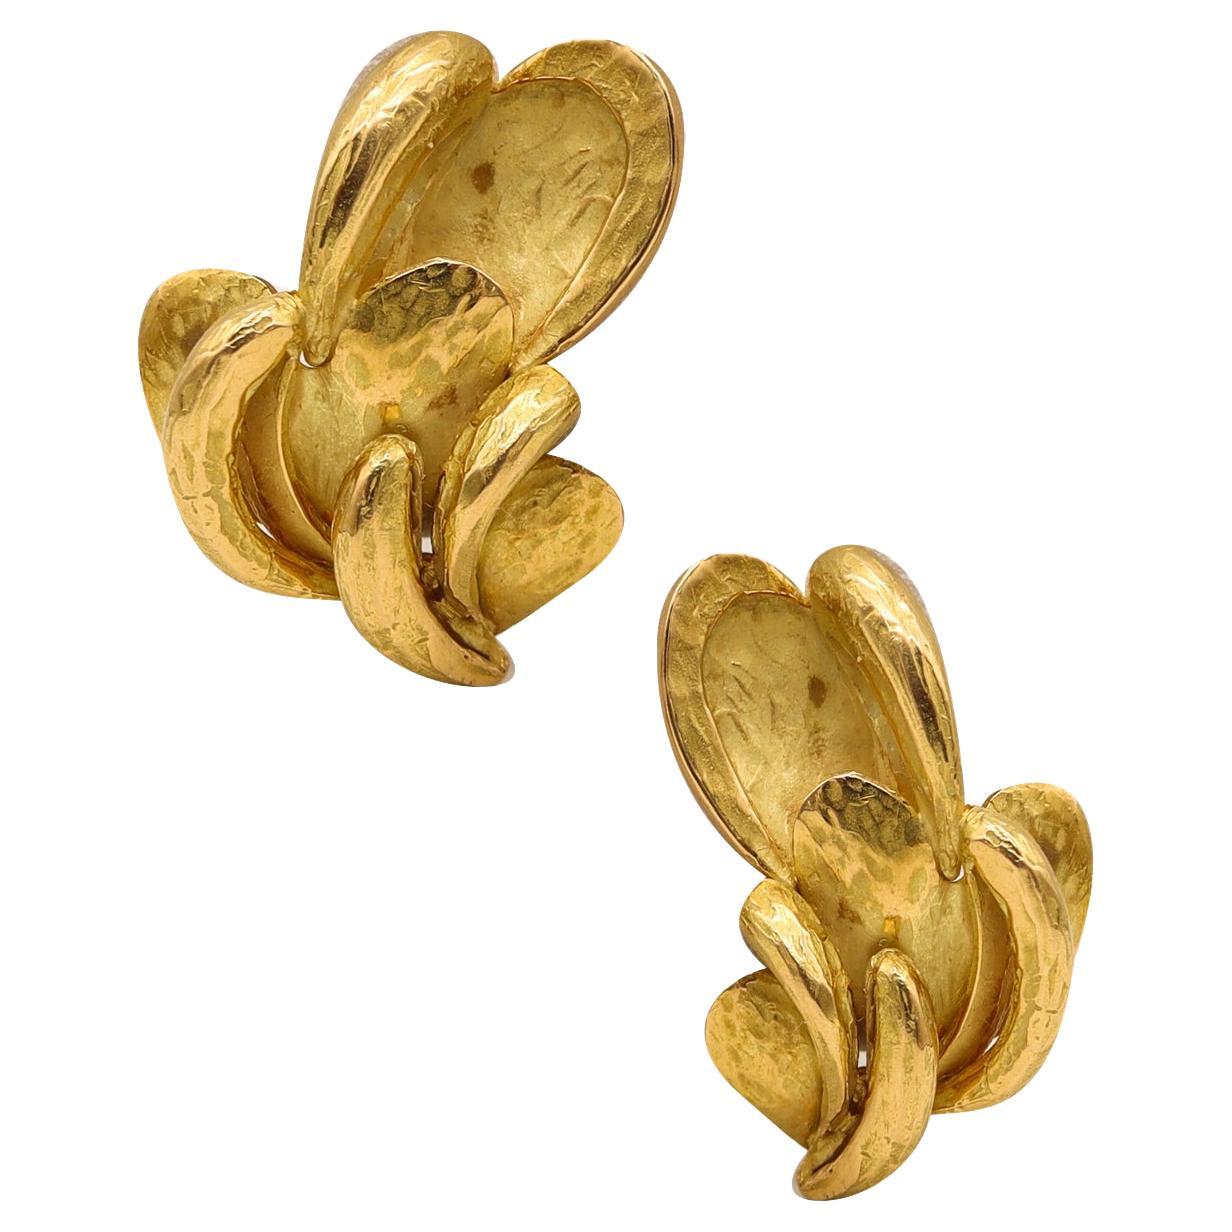 Chaumet Paris 1970 Retro Modernist Clip on Earrings in Solid 18kt Yellow Gold For Sale